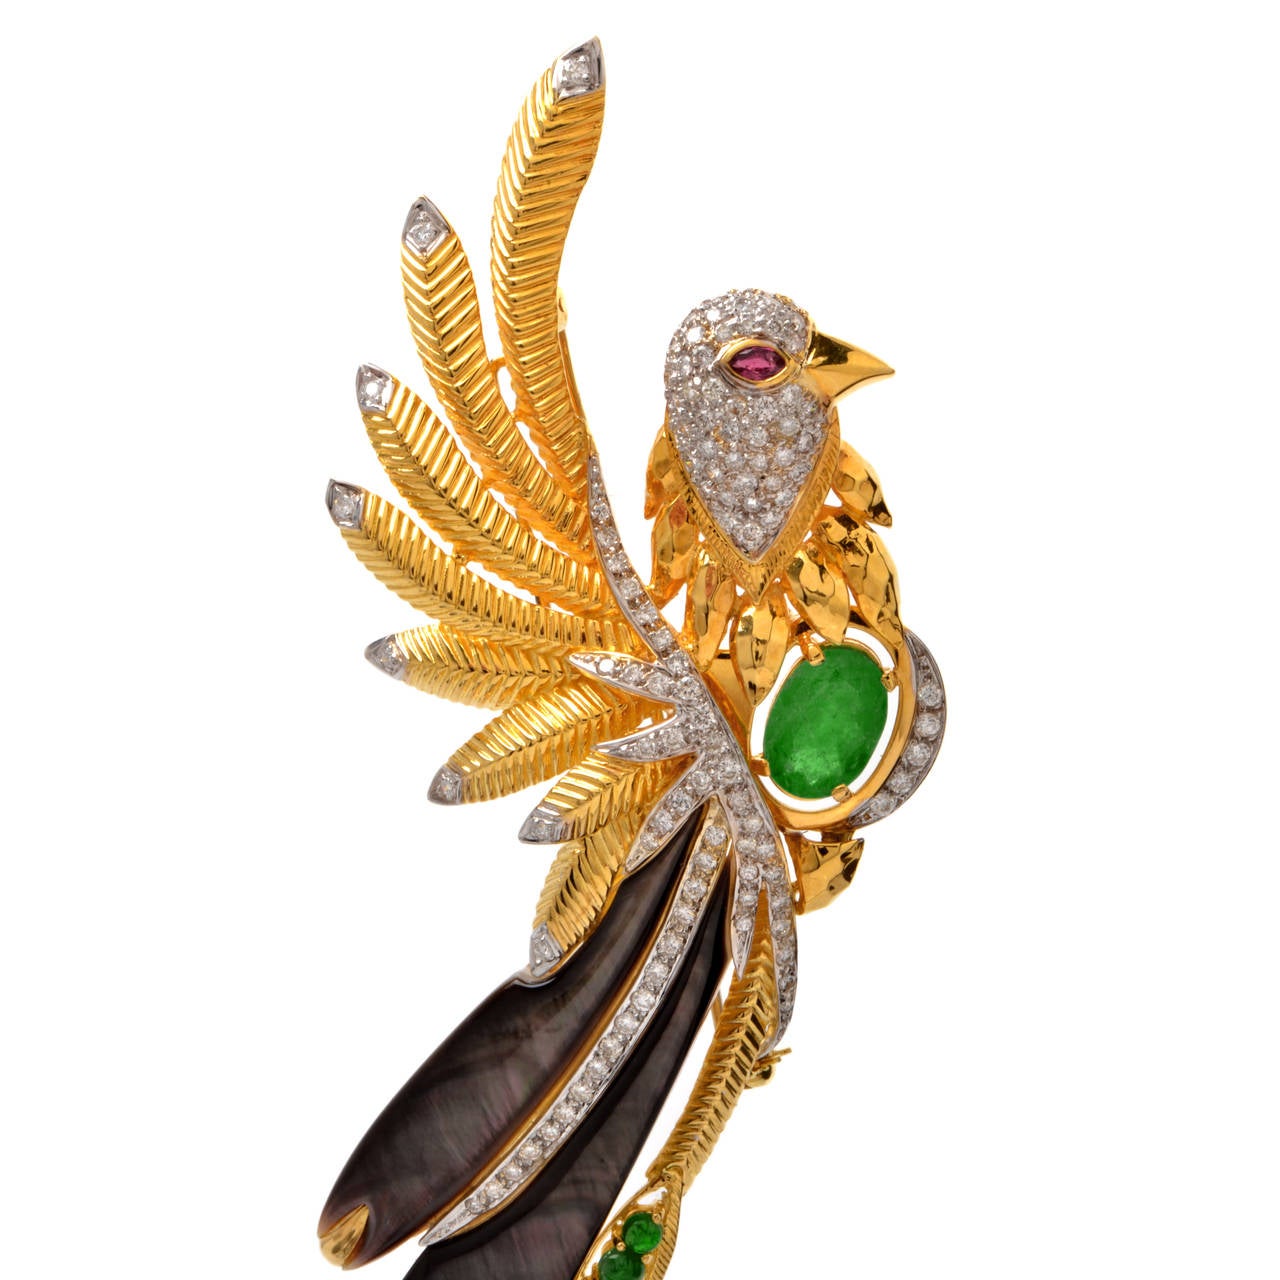 This absolutely stunning estate brooch pin is handcrafted in solid 18K yellow gold. Showcasing a large bird, where the eye is depicted by 1 genuine marquise  Ruby approx. 0.22 cttw, bezel set. The bird's body and tail are  represented with 1 genuine